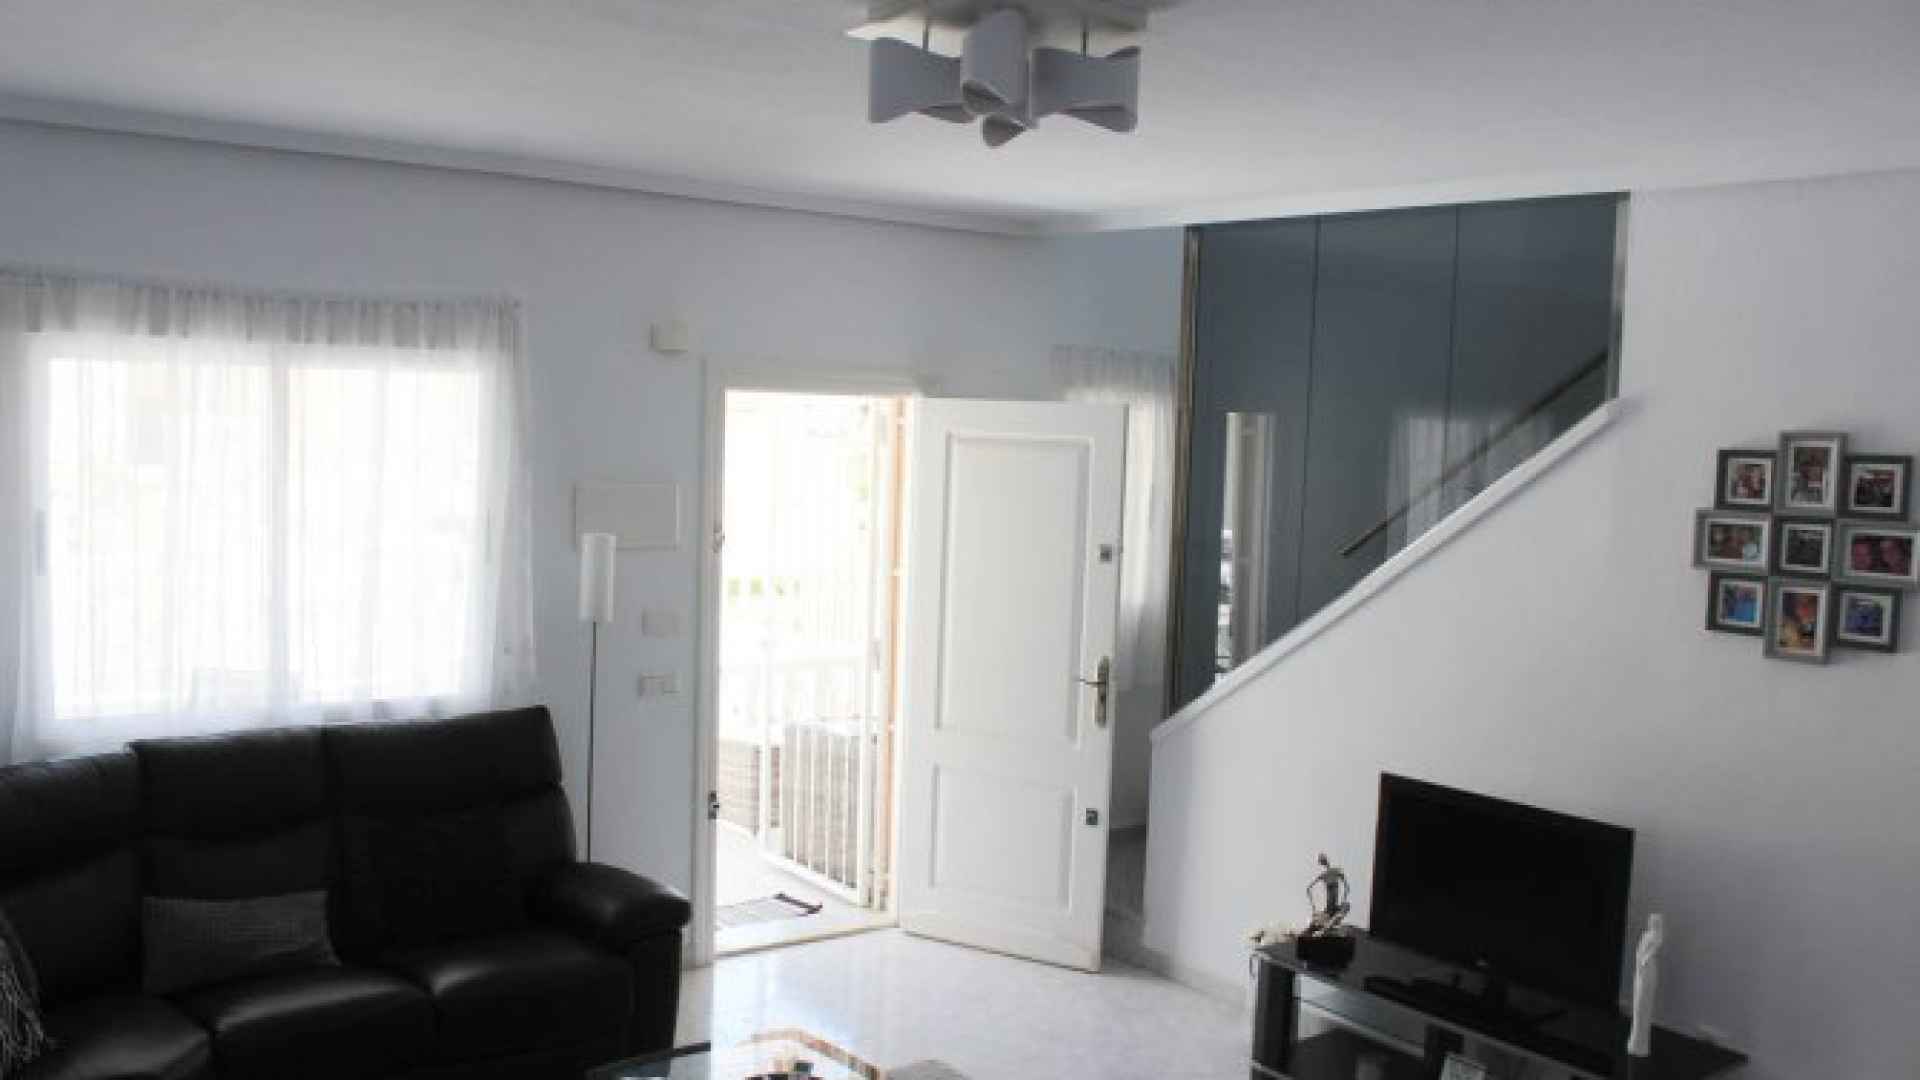 medium_15697_lovely_semi_detached_townhouse_with_pool_views_on_gated_community_270524090948_sr1371_taylor_(39)